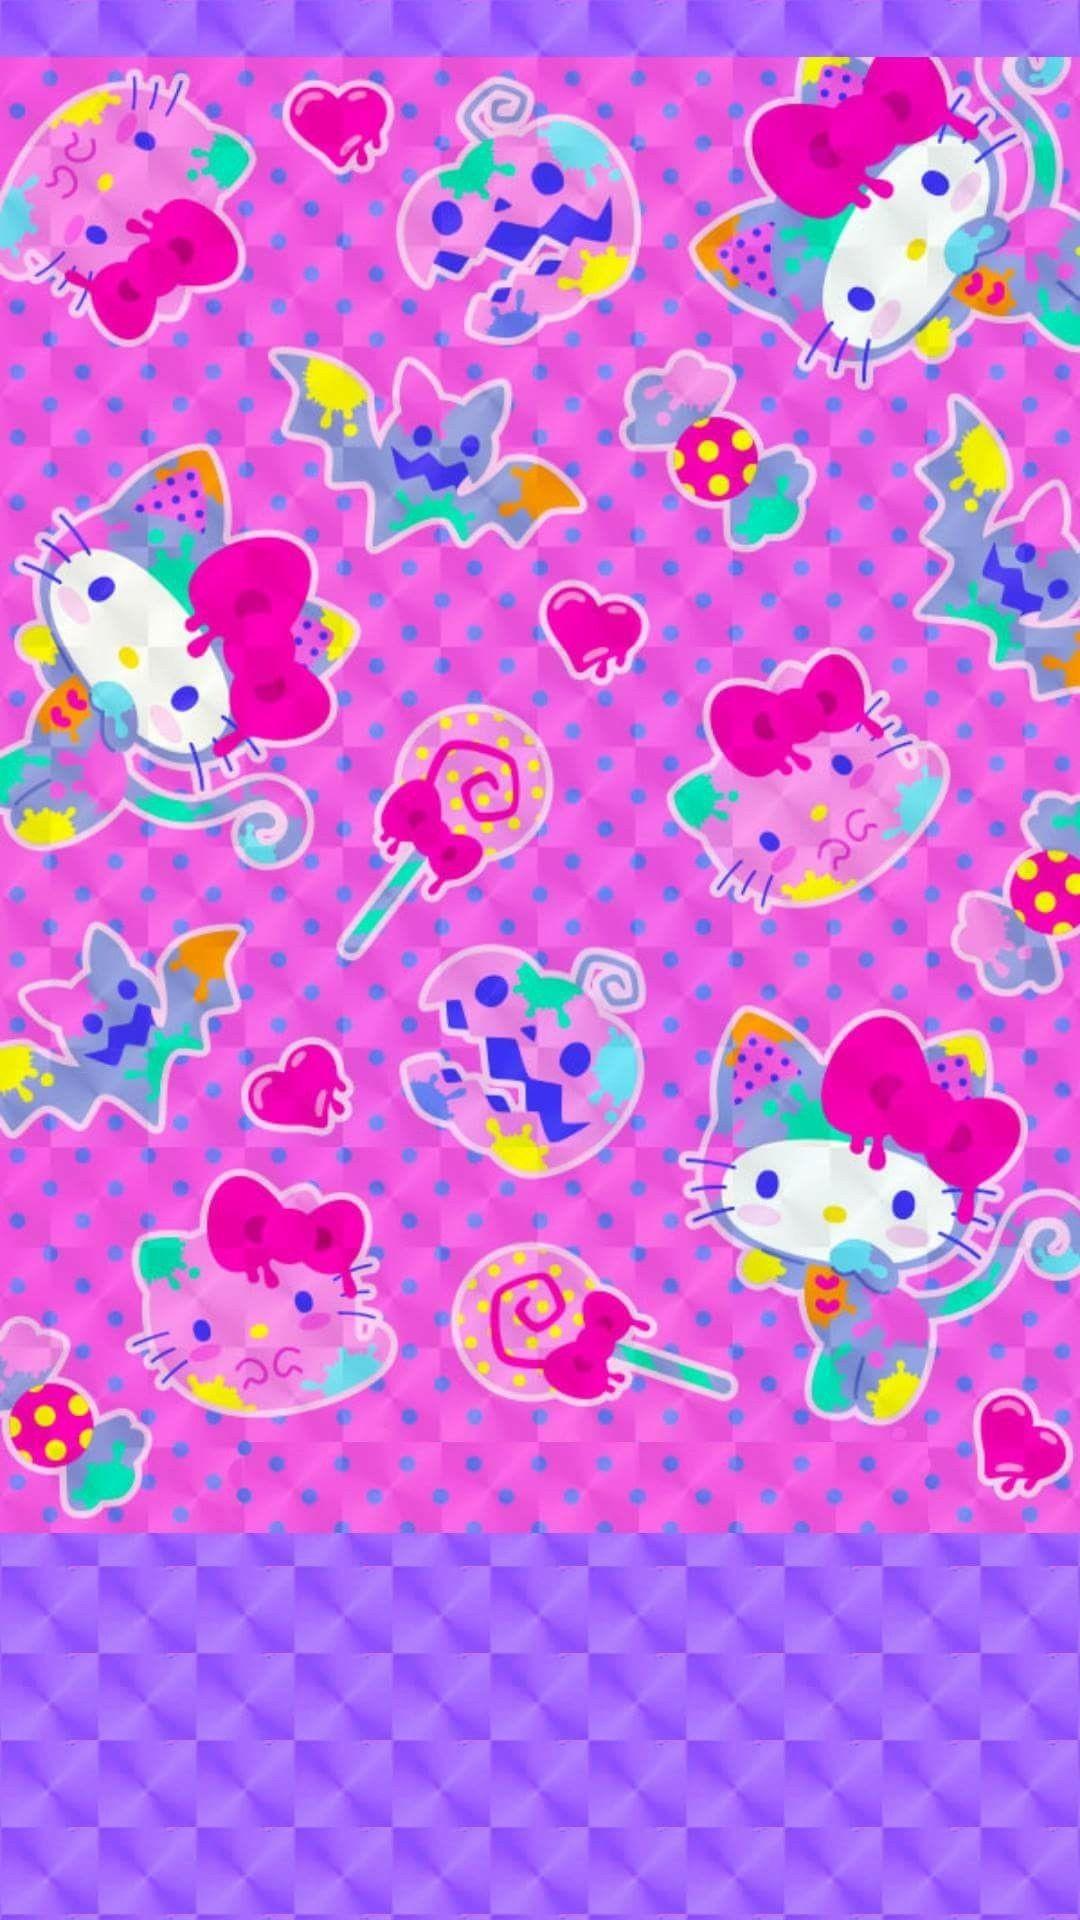 Download Free Hello Kitty Halloween Wallpapers  PixelsTalkNet Download  Free Hello Kitty Halloween Wallpapers PixelsTalk Net